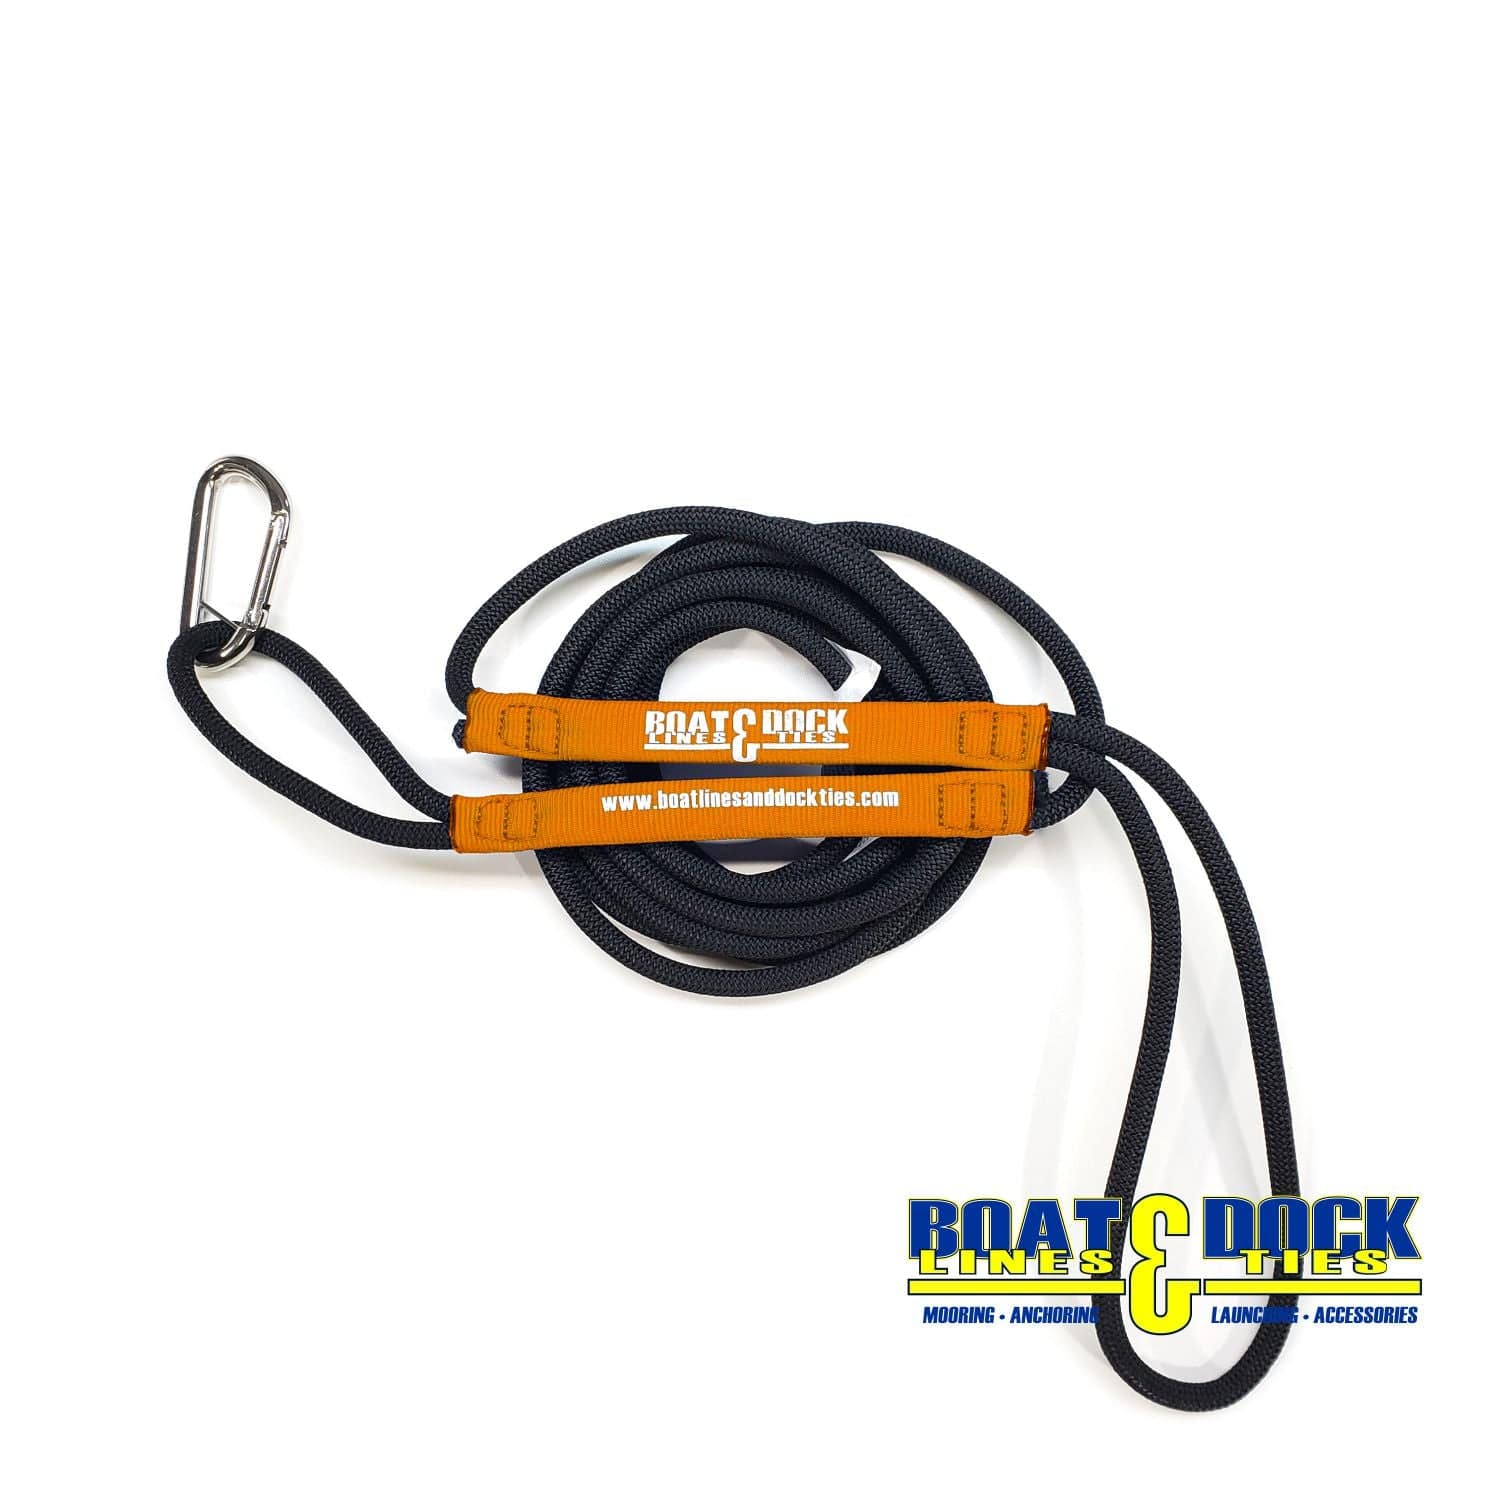  Boat Line Rope Bungee Cord Stretches to Double its